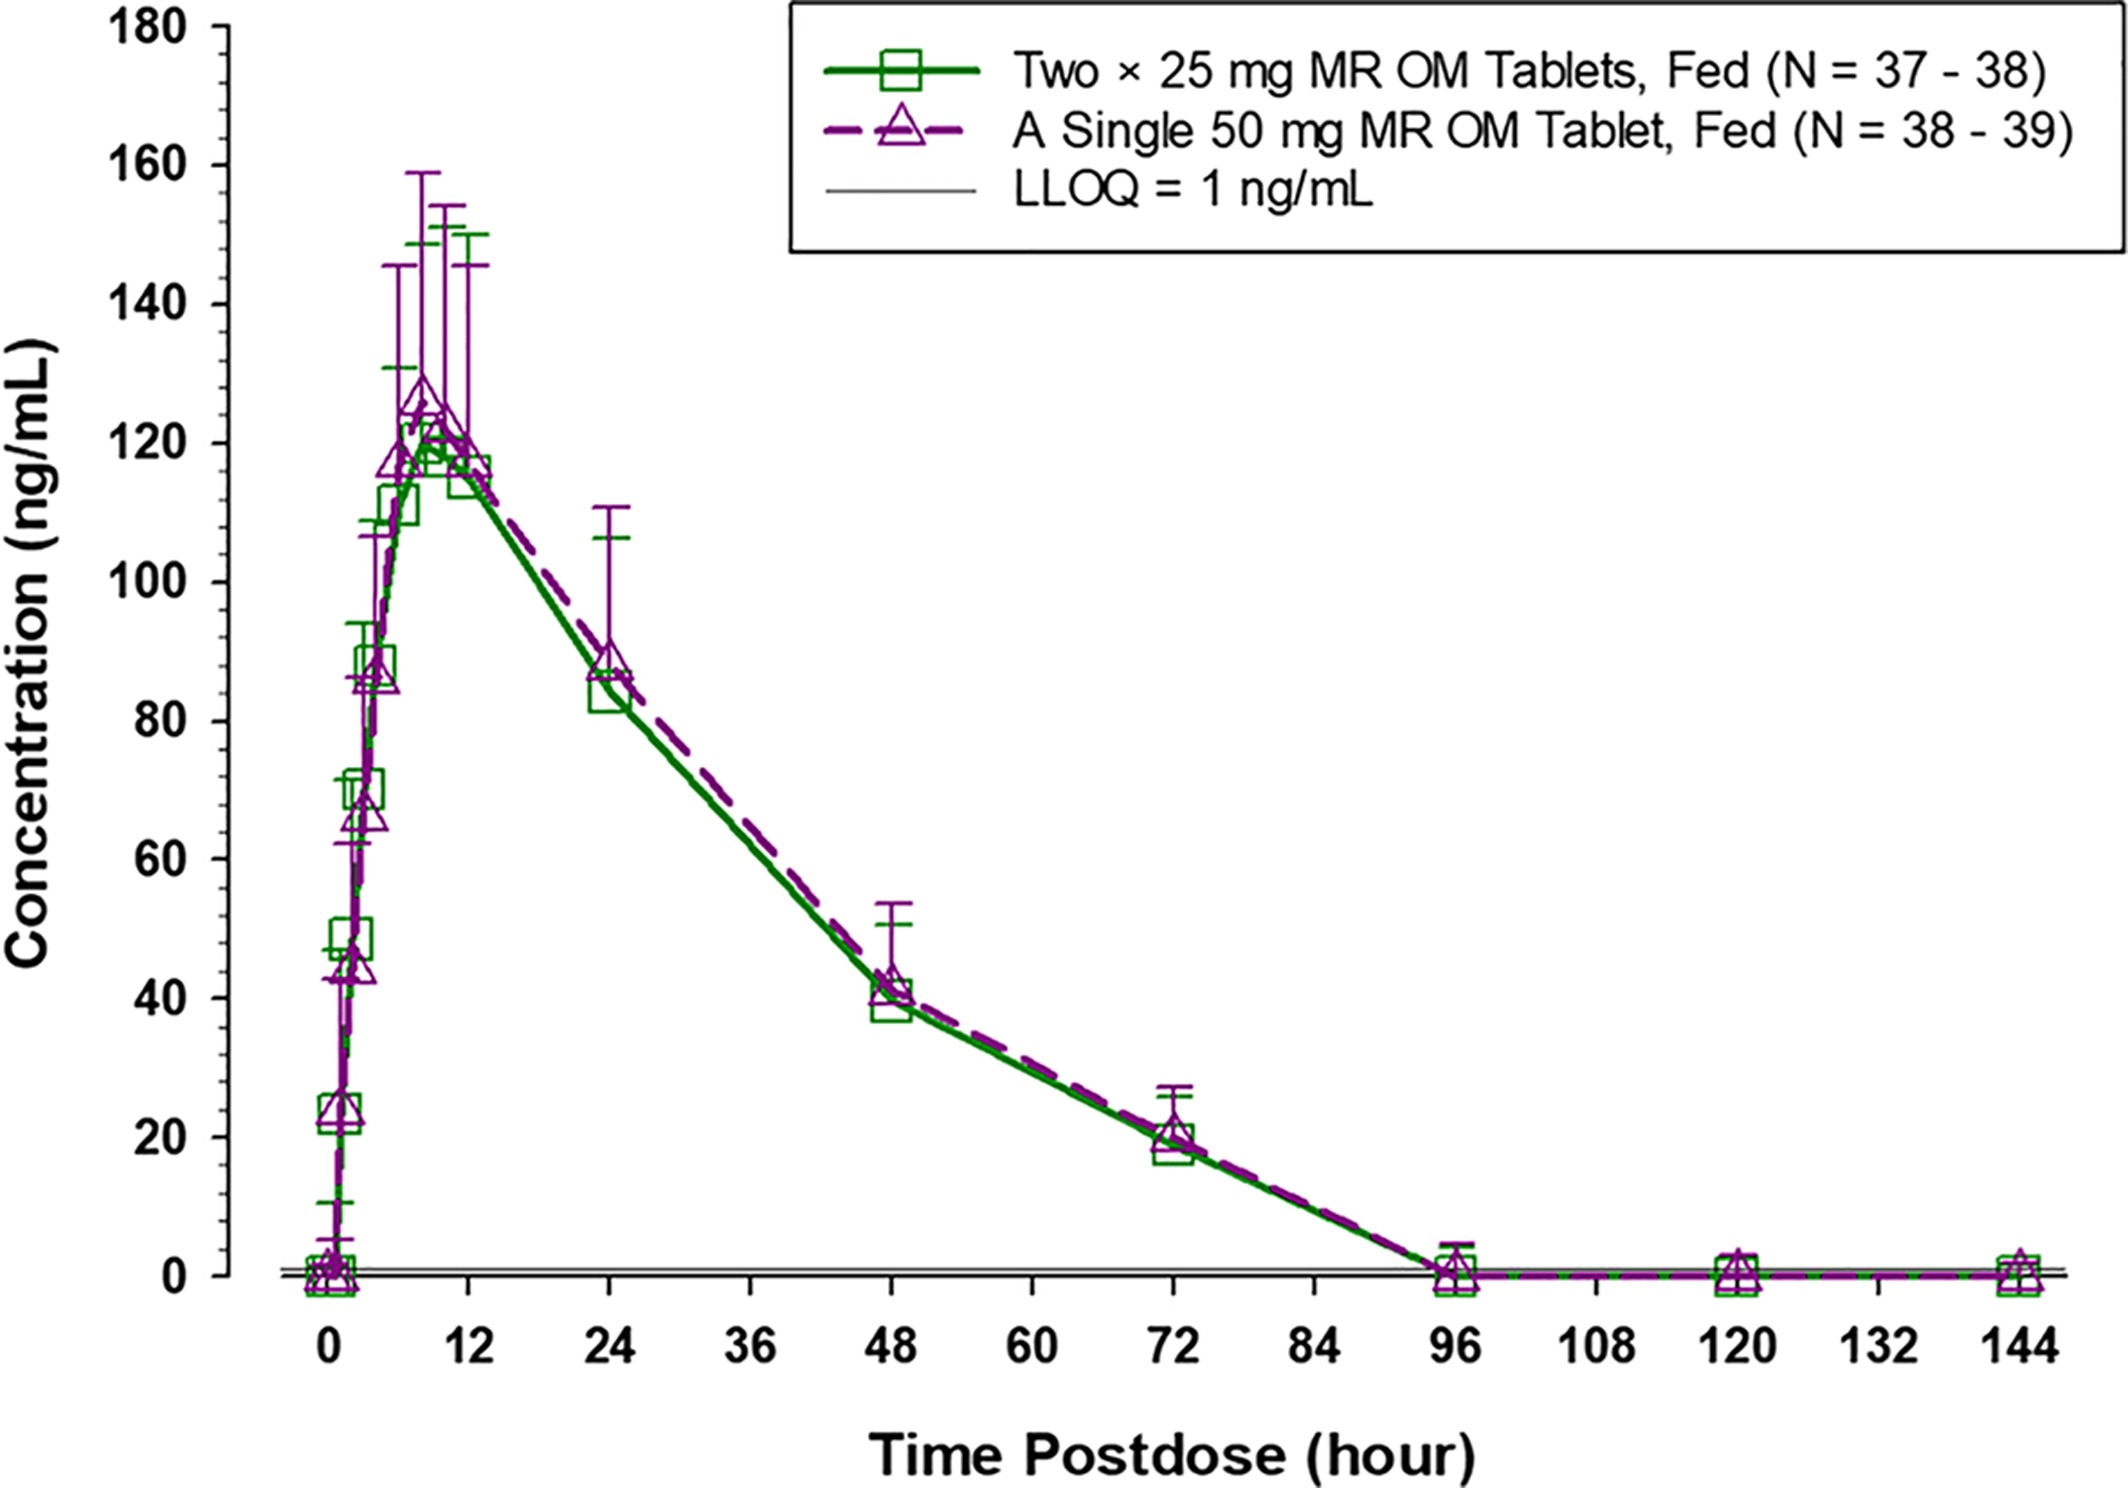 Switchability and minimal effect of food on pharmacokinetics of modified release tablet strengths of omecamtiv mecarbil, a cardiac myosin activator